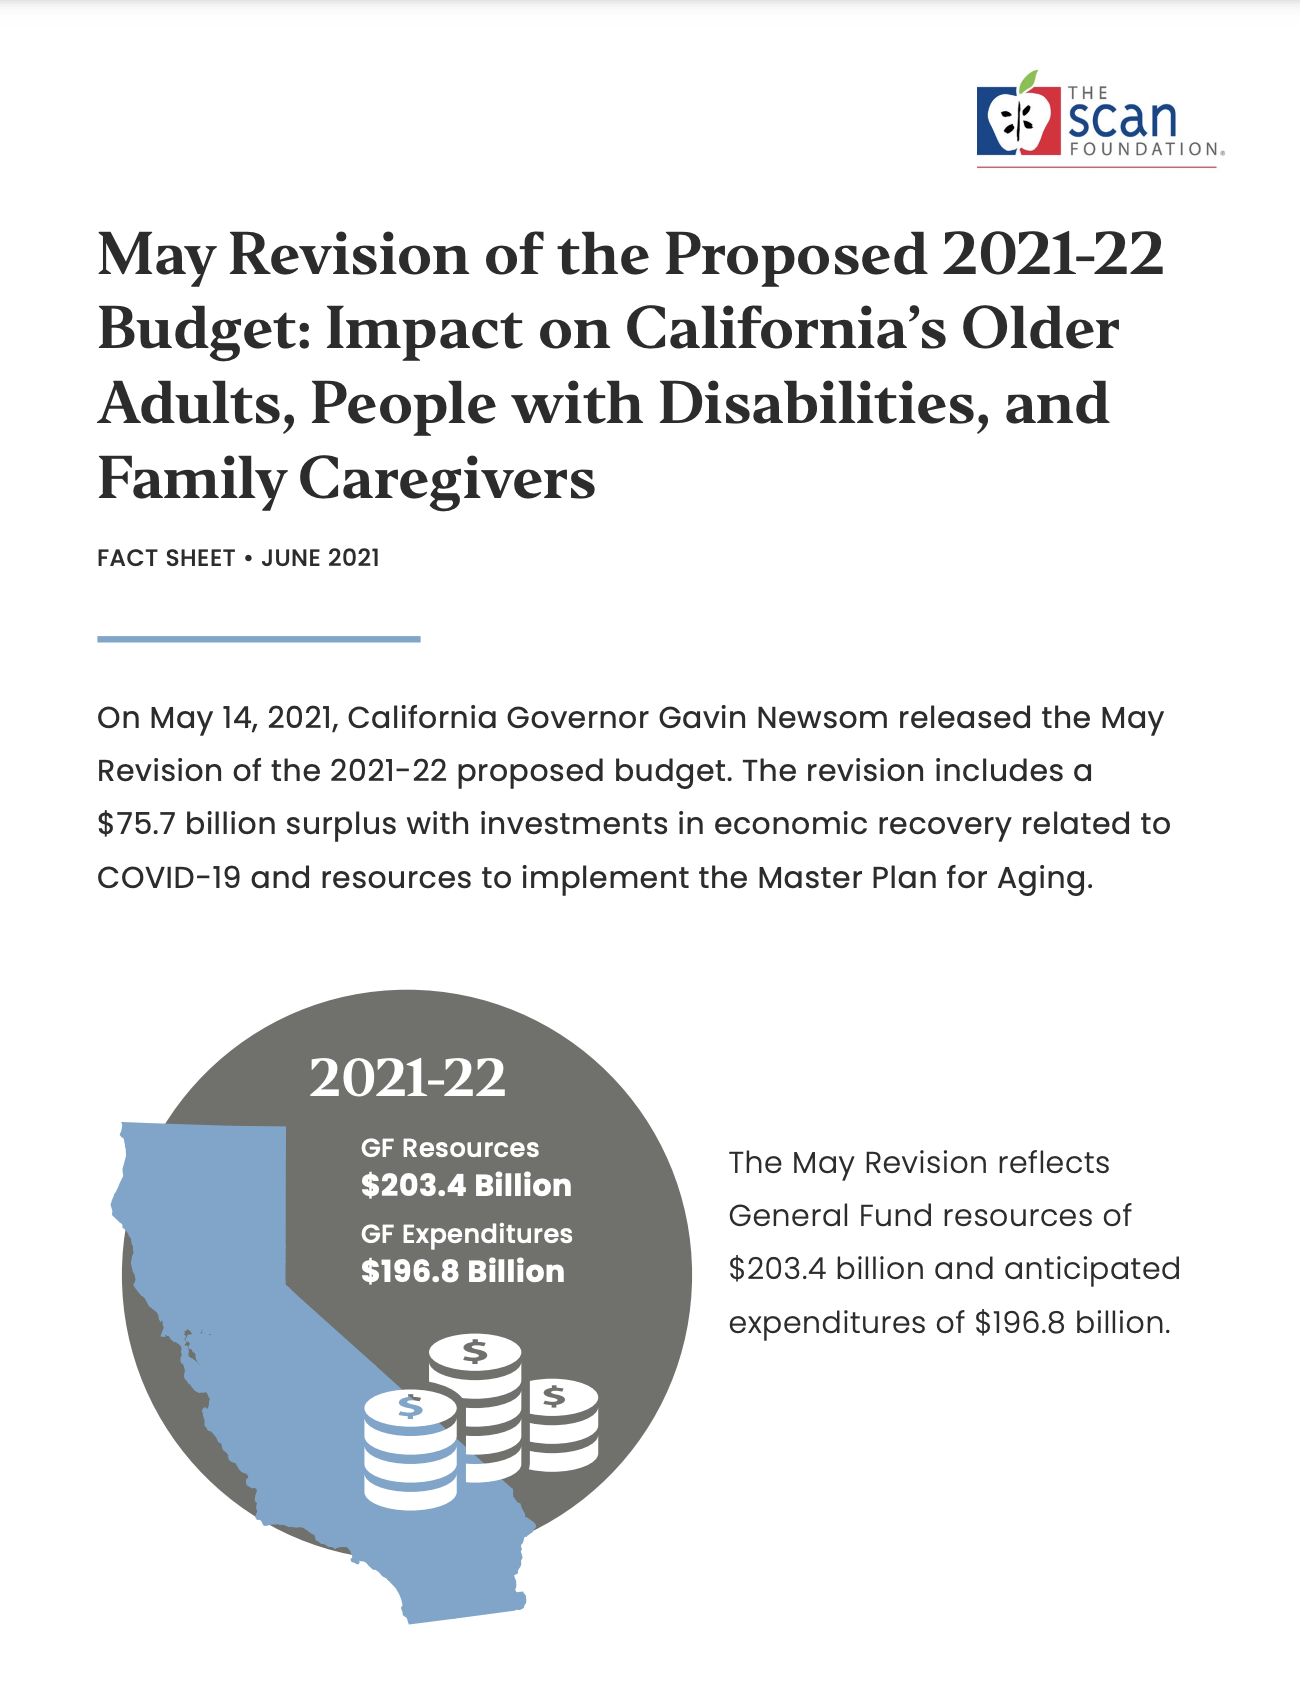 May Revision of the Proposed 2021-22 Budget: Impact on California’s Older Adults, People With Disabilities, and Family Caregivers